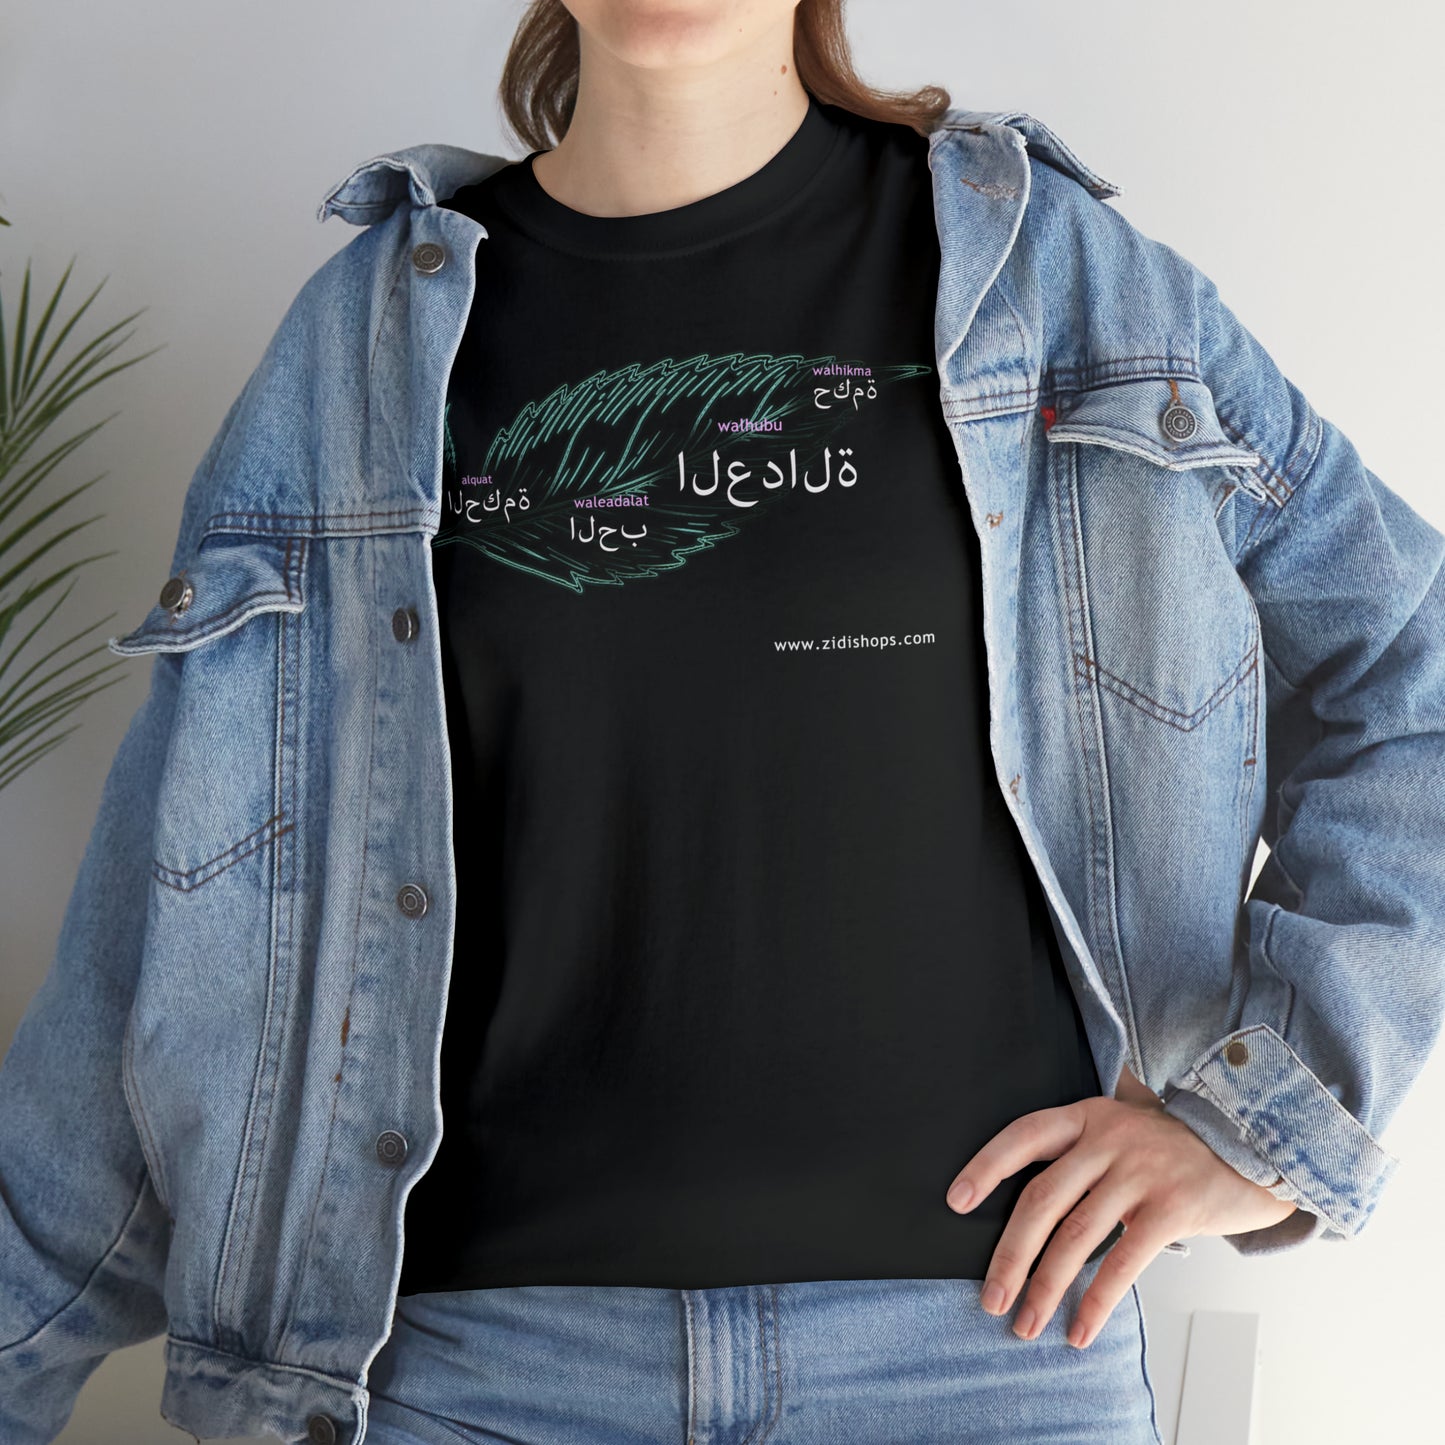 Arabic, Unisex Heavy Cotton Tee, Power, Justice, Love, wisdom, Arabic, spun fibers provide a smooth surface, no itchy interruptions under the arms